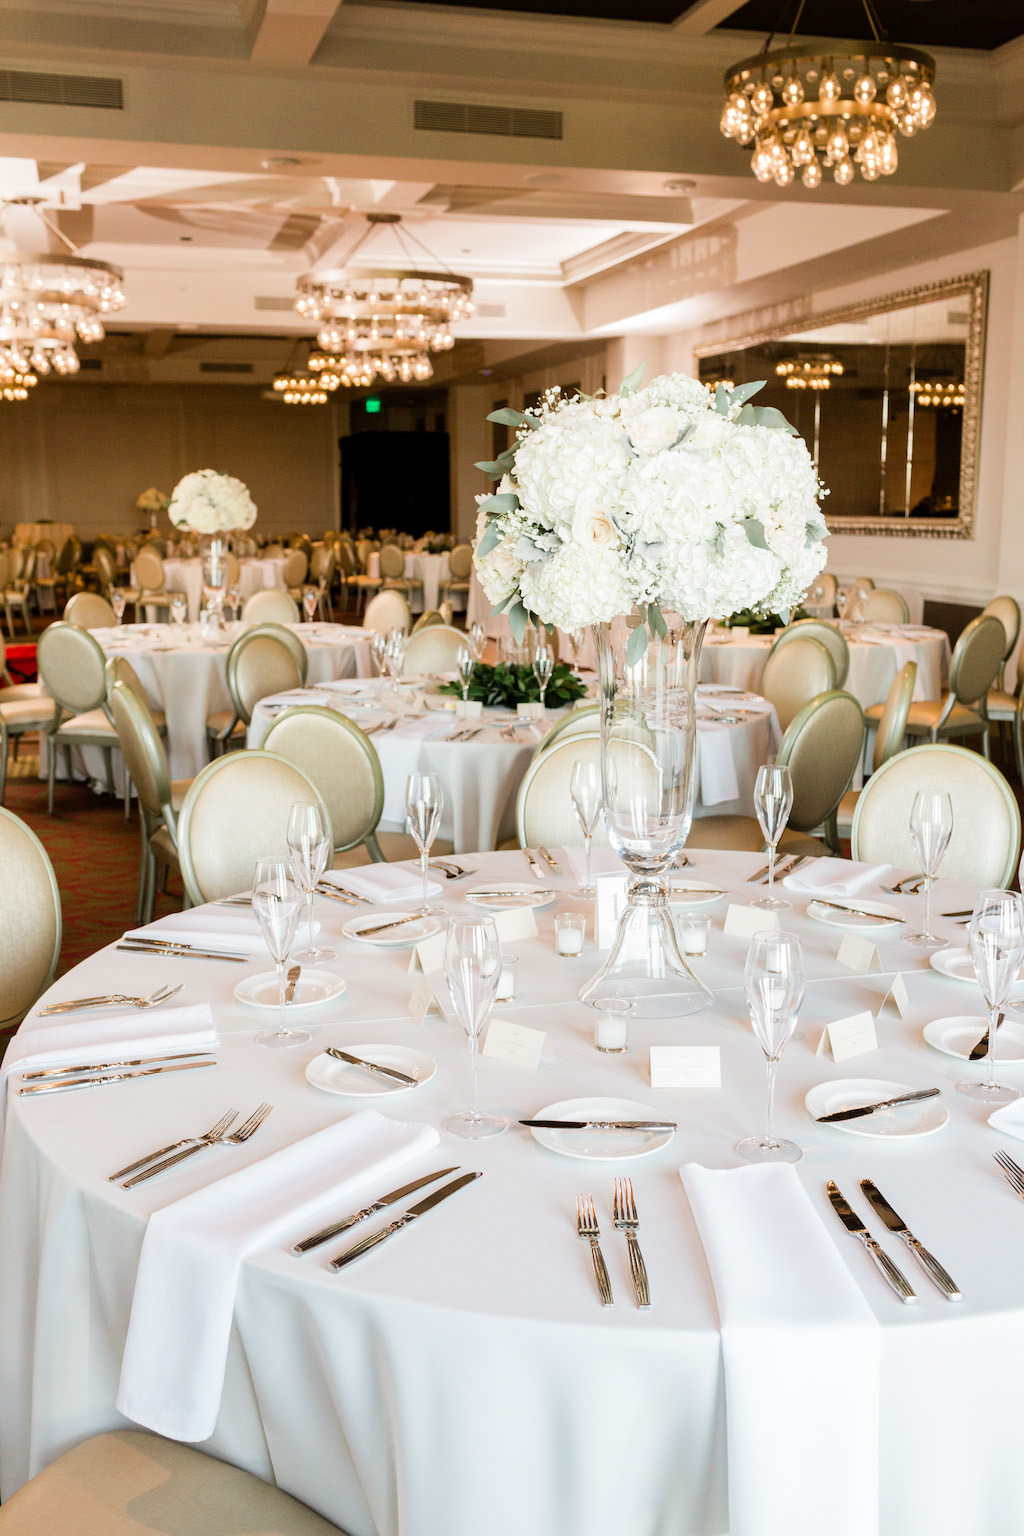 White Ivory and Taupe Wedding Reception with Round Tables, Oval Back Chairs, with Tall white Hydrangea and Greenery Centerpiece in Clear Glass Vase | Downtown St Pete Boutique Hotel Wedding Venue The Birchwood | Tampa Bay Wedding Florist The Birchwood